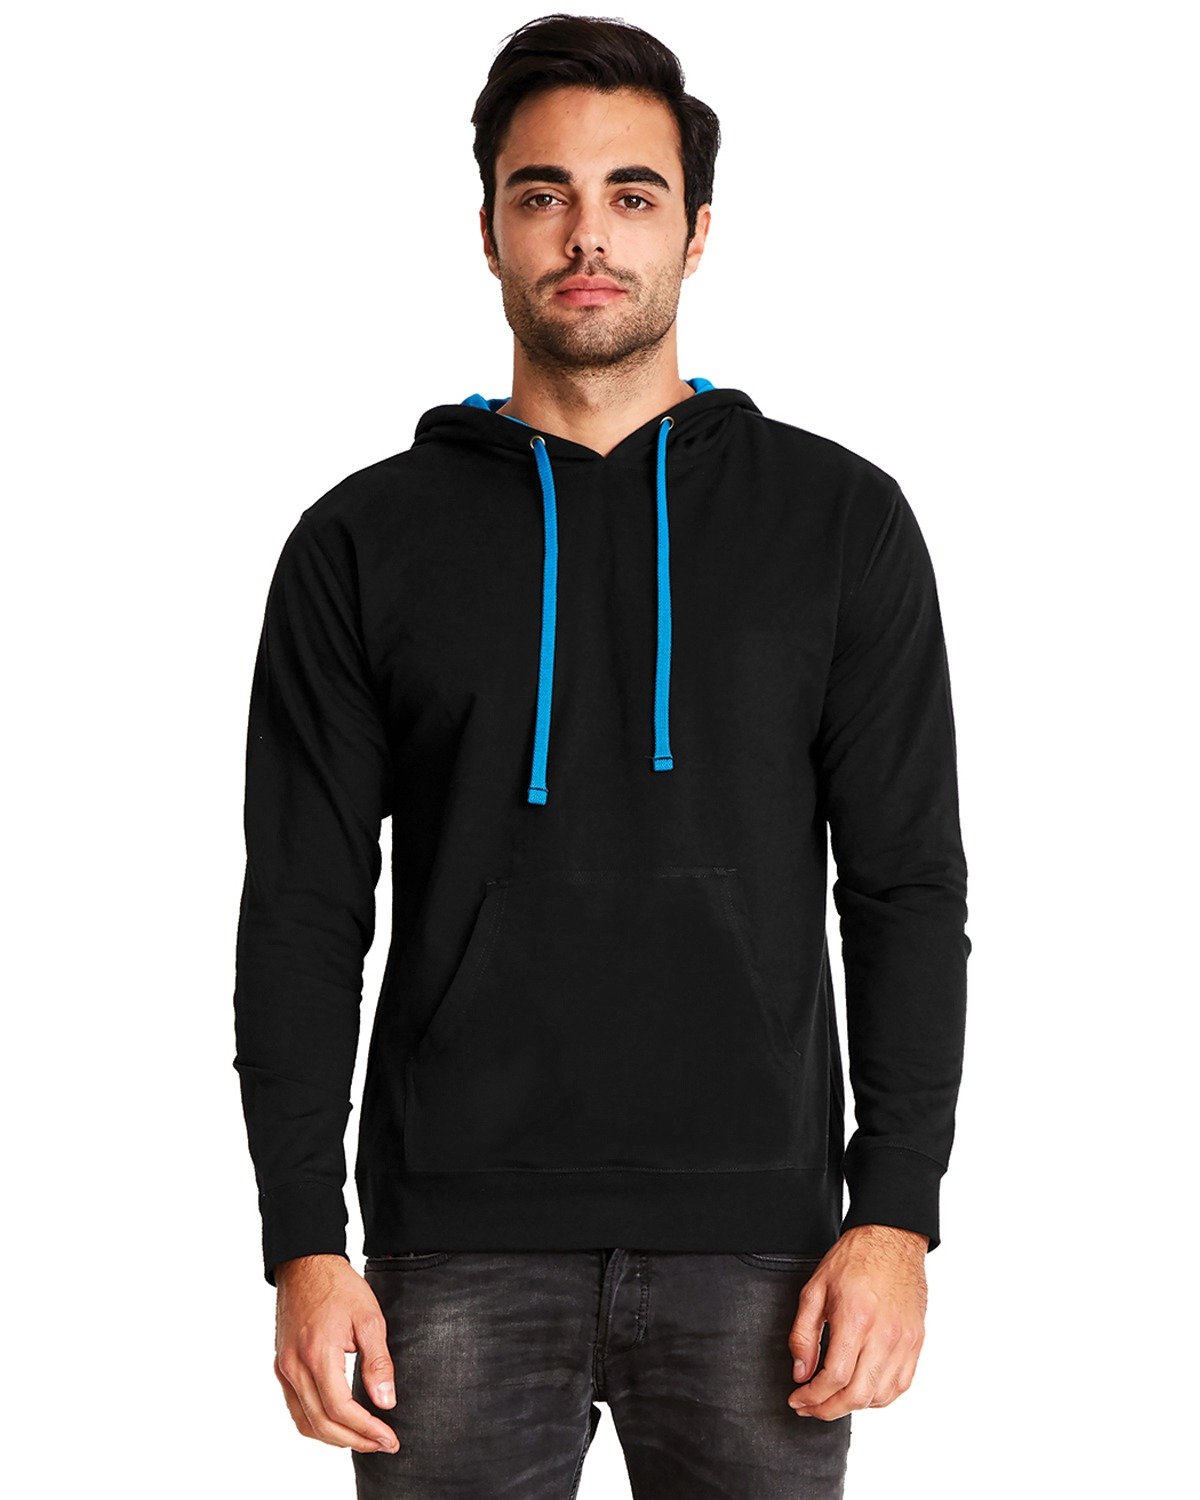 Next Level Apparel Unisex Laguna French Terry Pullover Hooded Sweatshirt BLACK/ TURQUOISE 